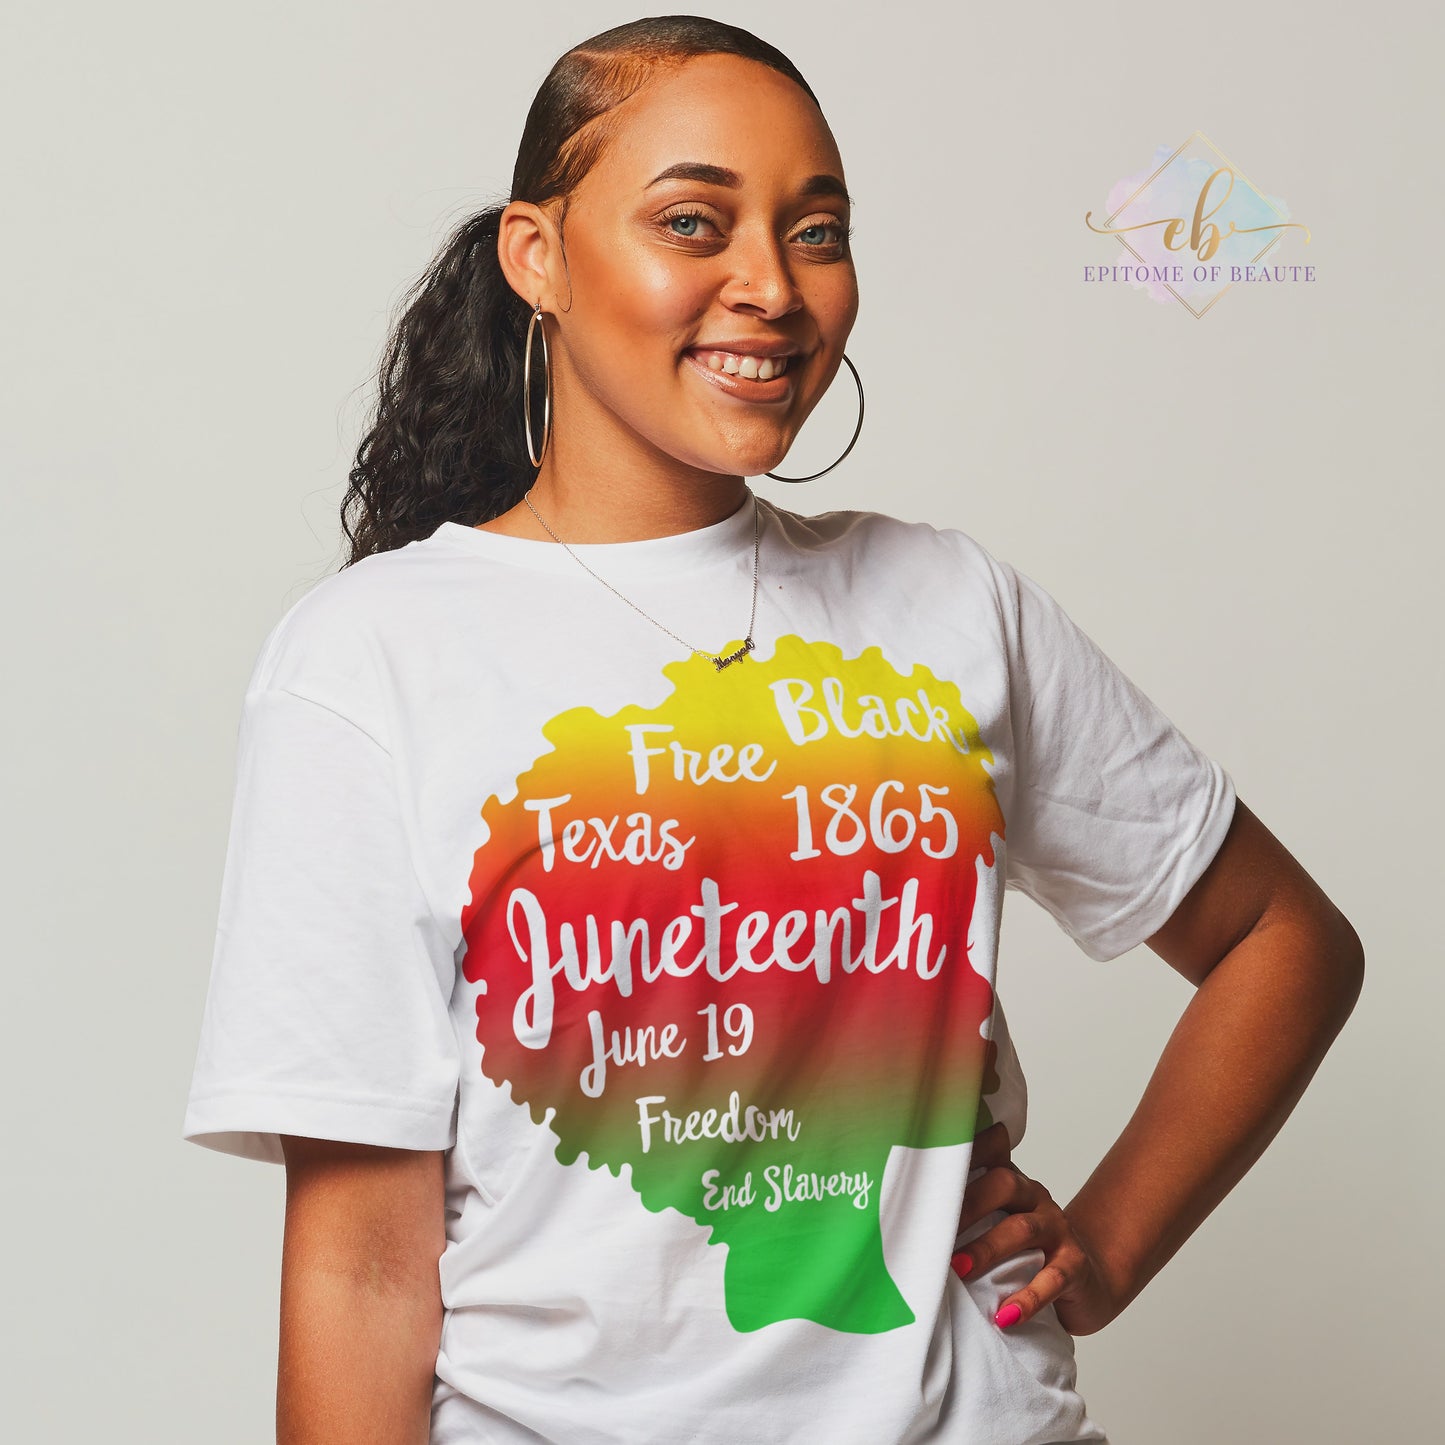 Black and Free Juneteenth T-shirt